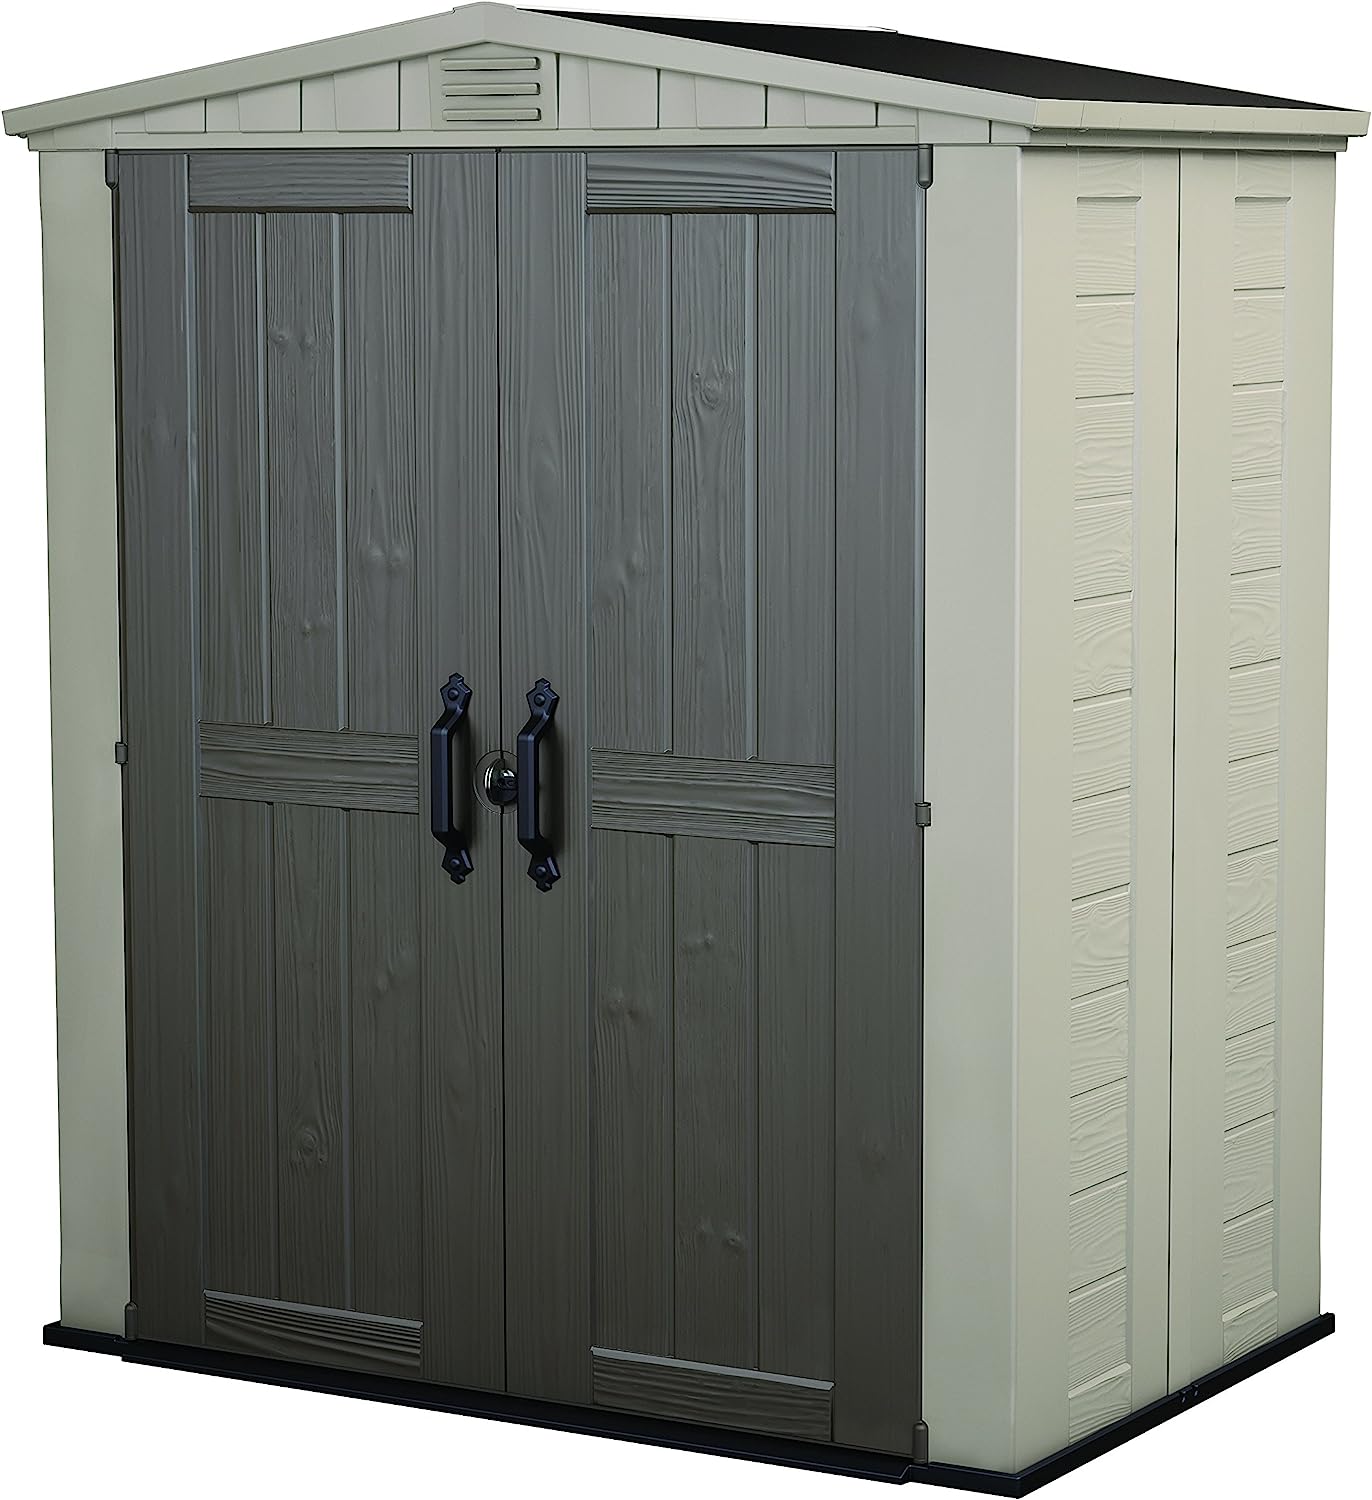 Keter Factor 6x3 Outdoor Storage Shed Kit-Perfect to [...]